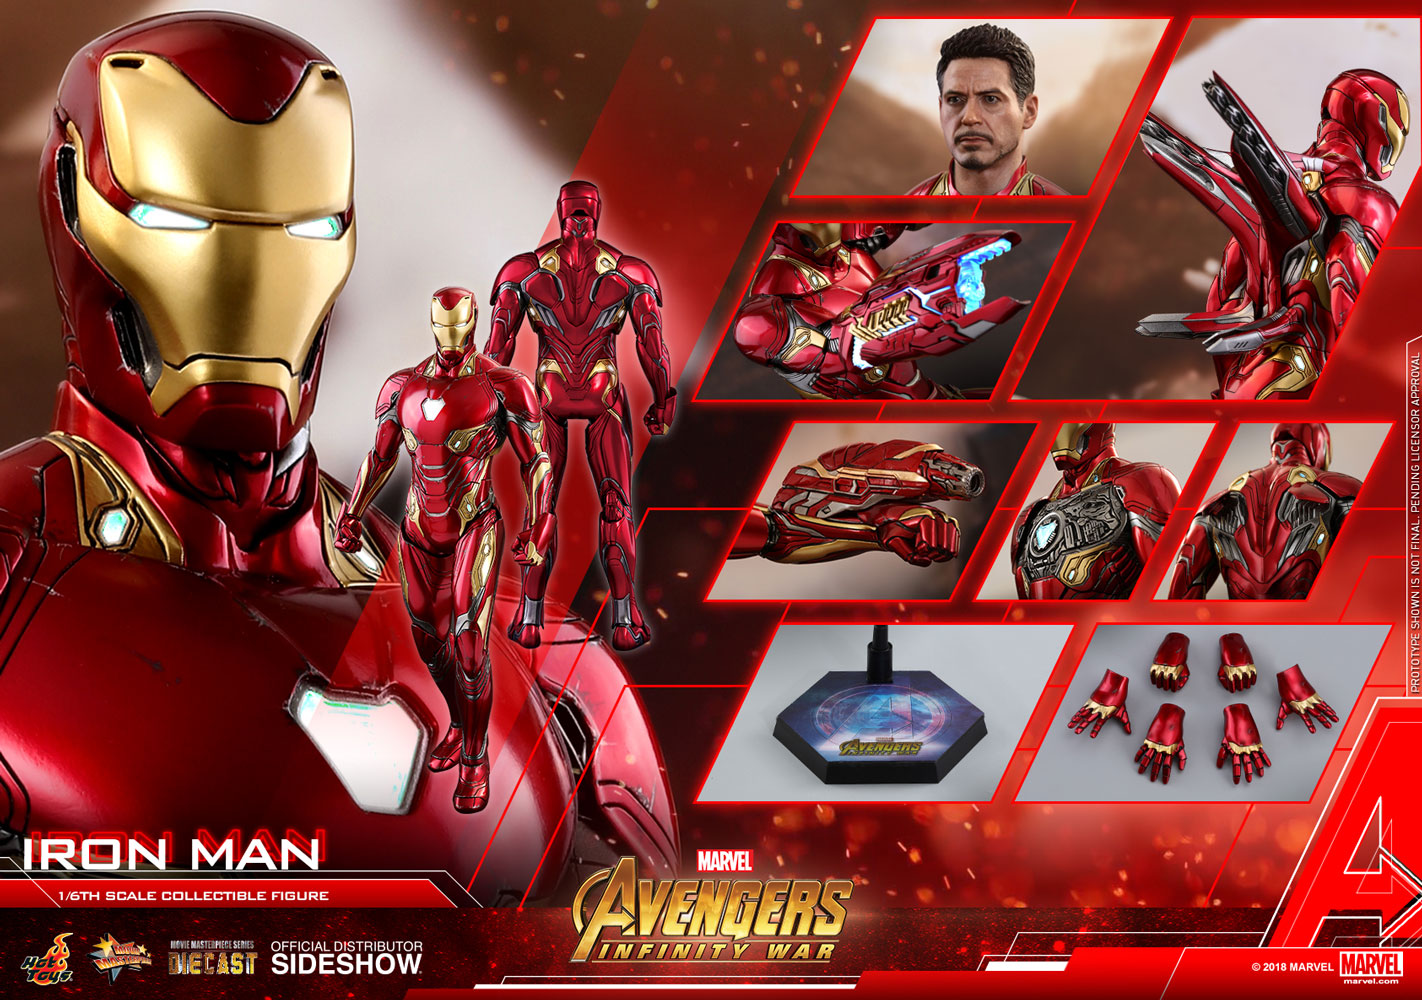 Iron Man Mark L Sixth Scale Figure by Hot Toys